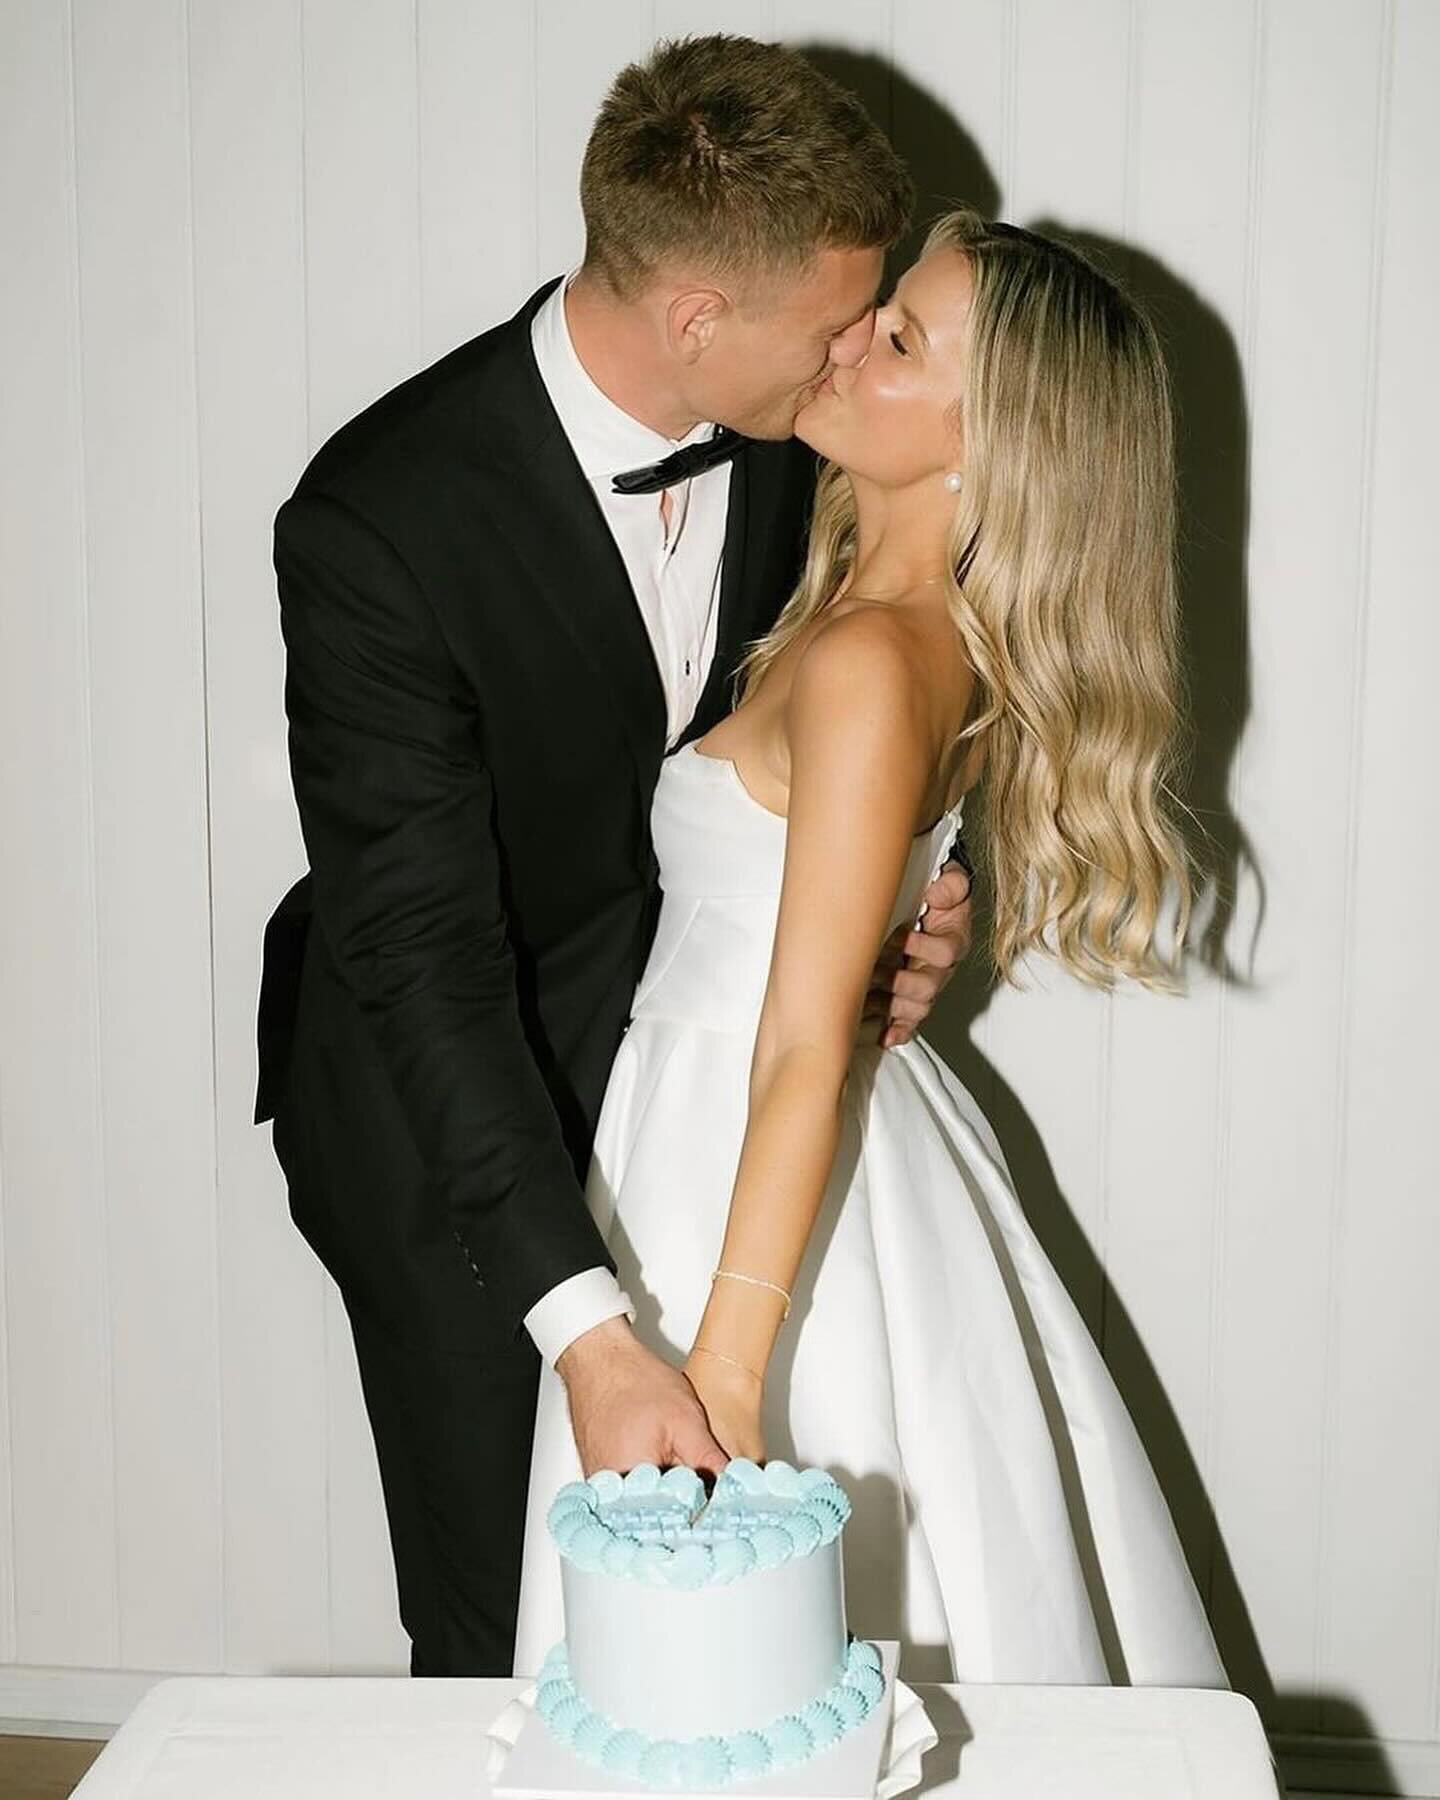 @chosenbykyha bride @tahliaajansen wearing the KASIA CORSET paired with the MILFORD SKIRT.

The Cake&hellip;

The Champagne tower&hellip;
By @aliceandrephoto 

#chosenbykyha #kasiacorset #milfordskirt #chosenbykyhastockist #forthemodernbride #modernb